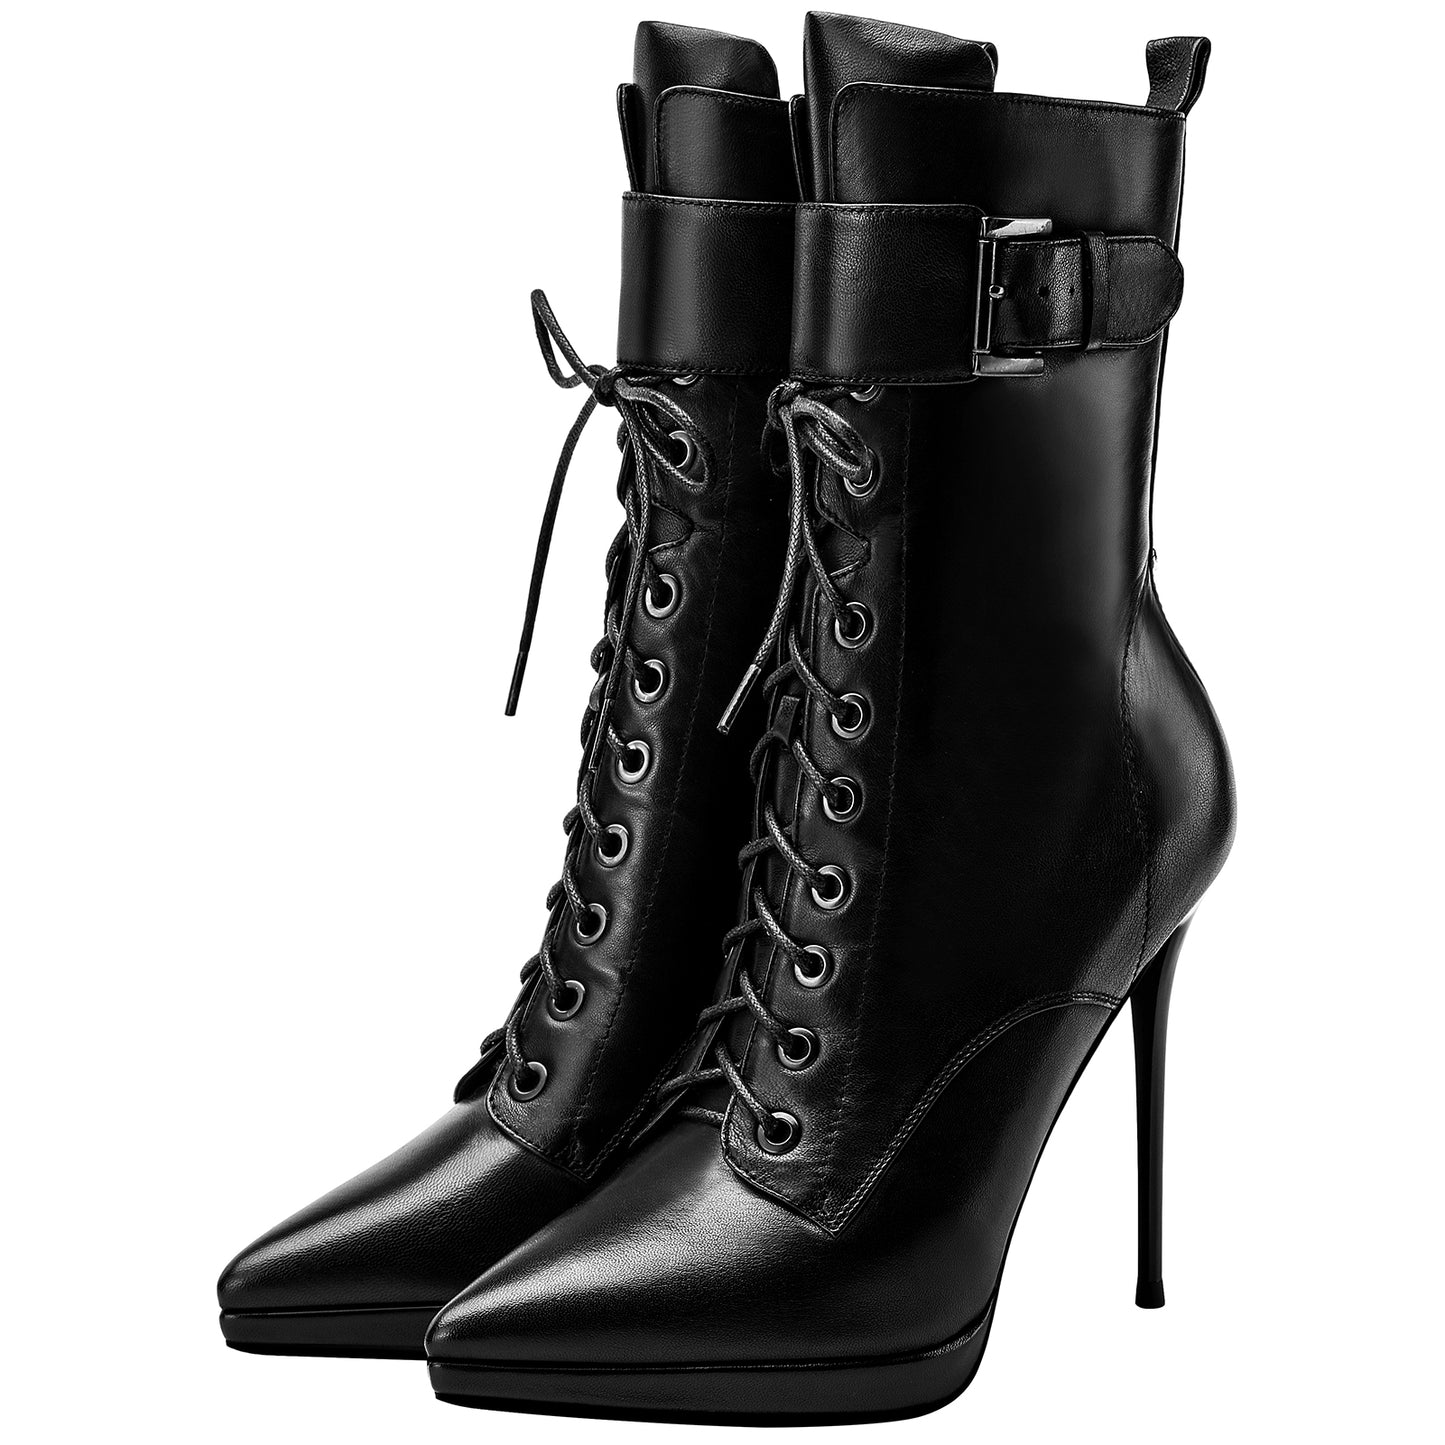 Mid-calf Boots Platform Lace up High Heel Leather Stiletto Pointed Toe